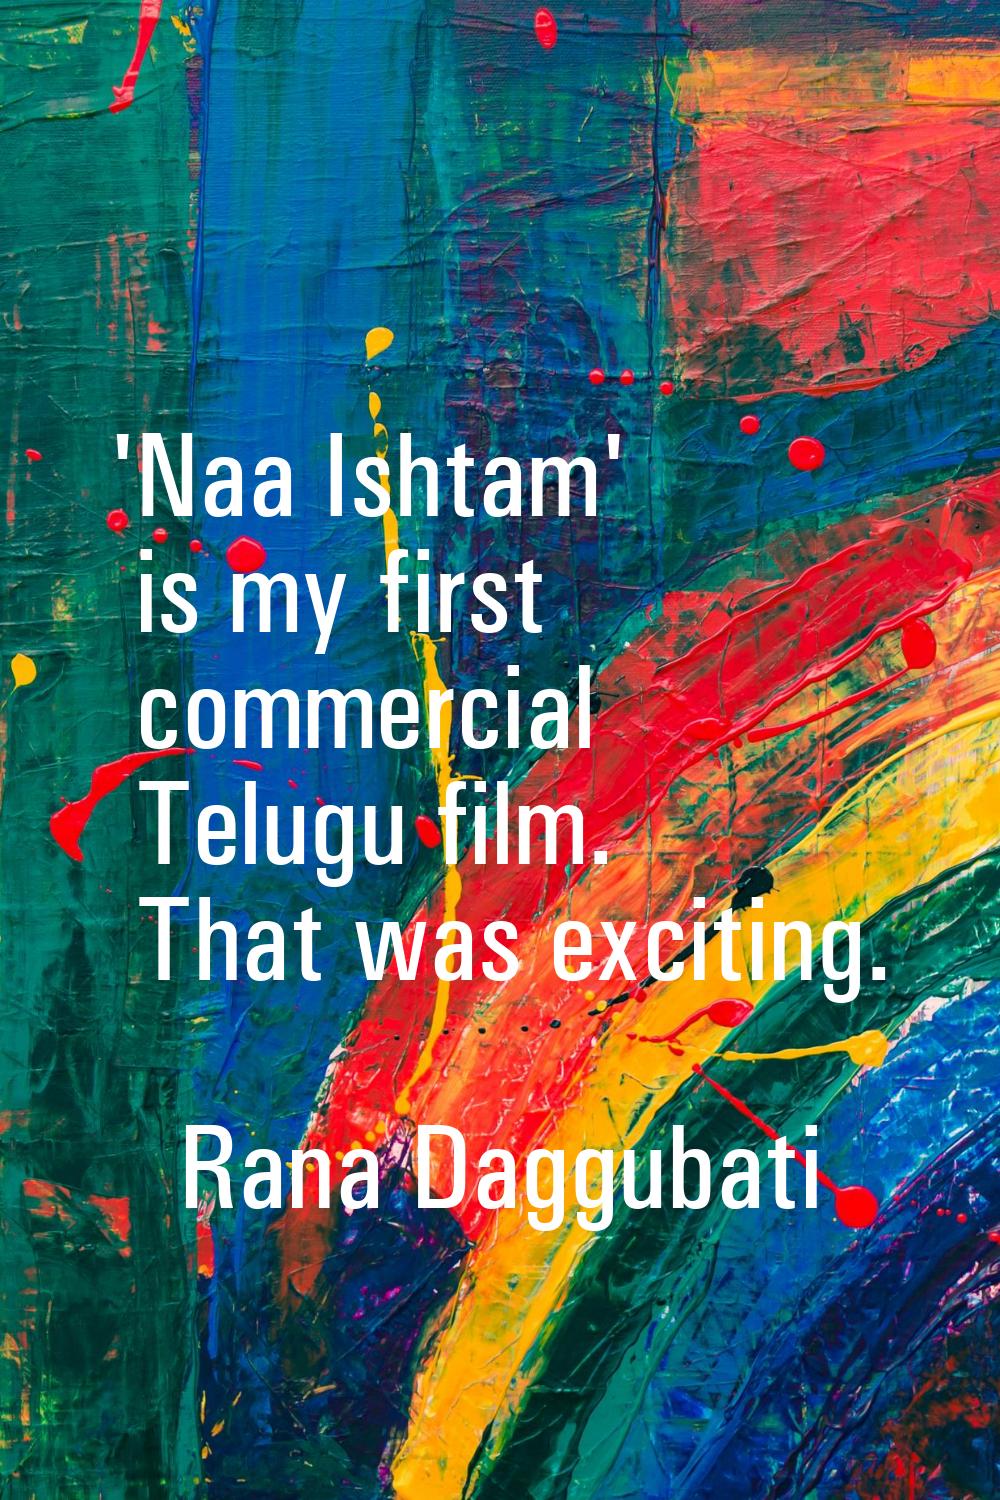 'Naa Ishtam' is my first commercial Telugu film. That was exciting.